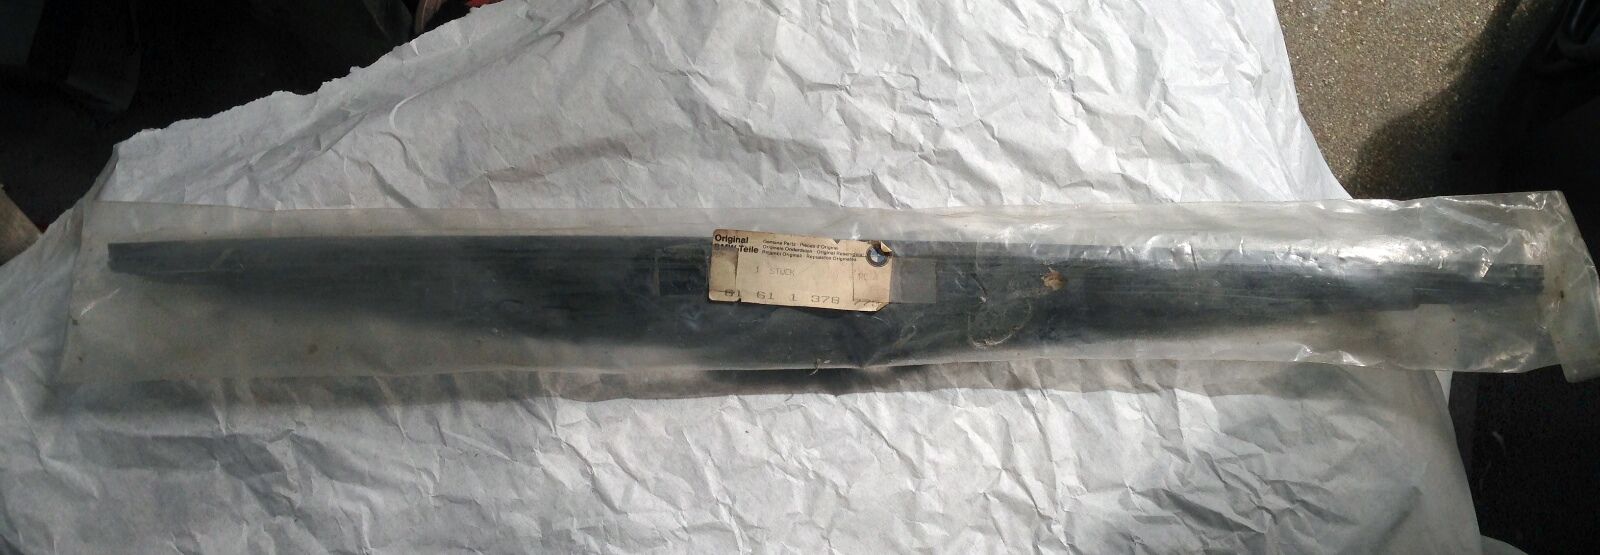 NEW OEM BMW Wiperblade for early 90s 5-, 7- and 8-Series - P/N 61-61-1-378-773 